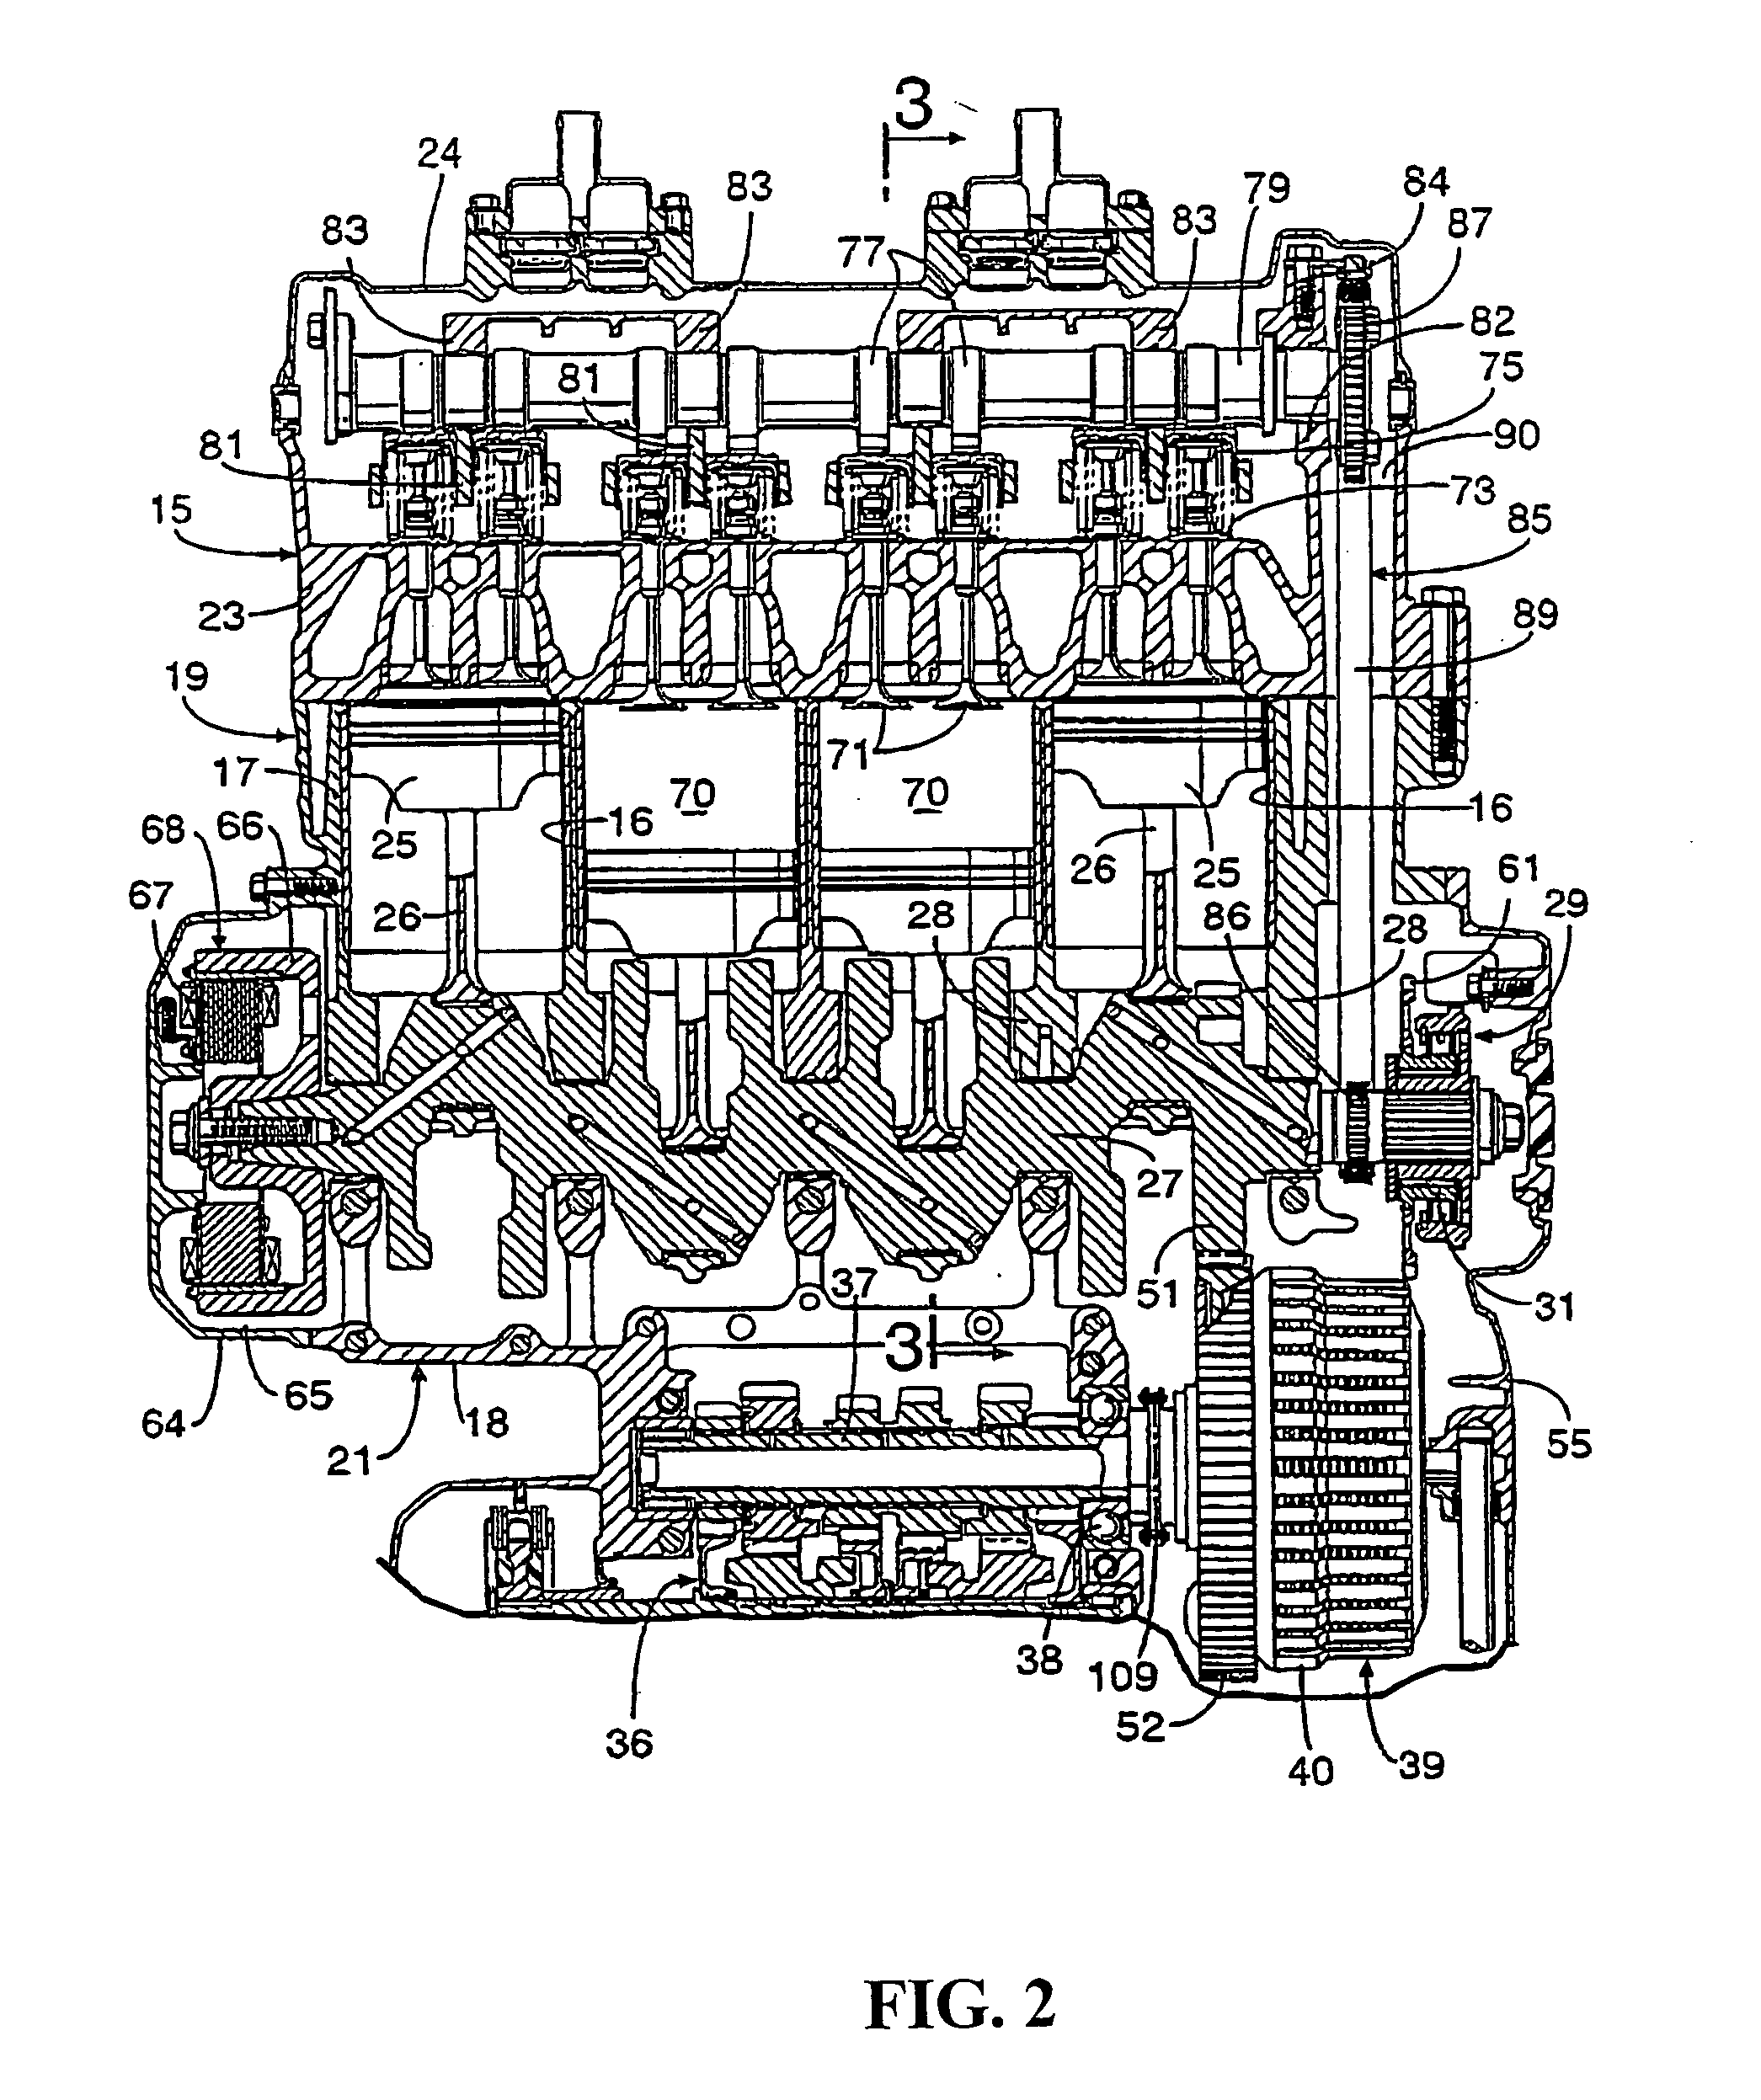 Water pump for cooling engine